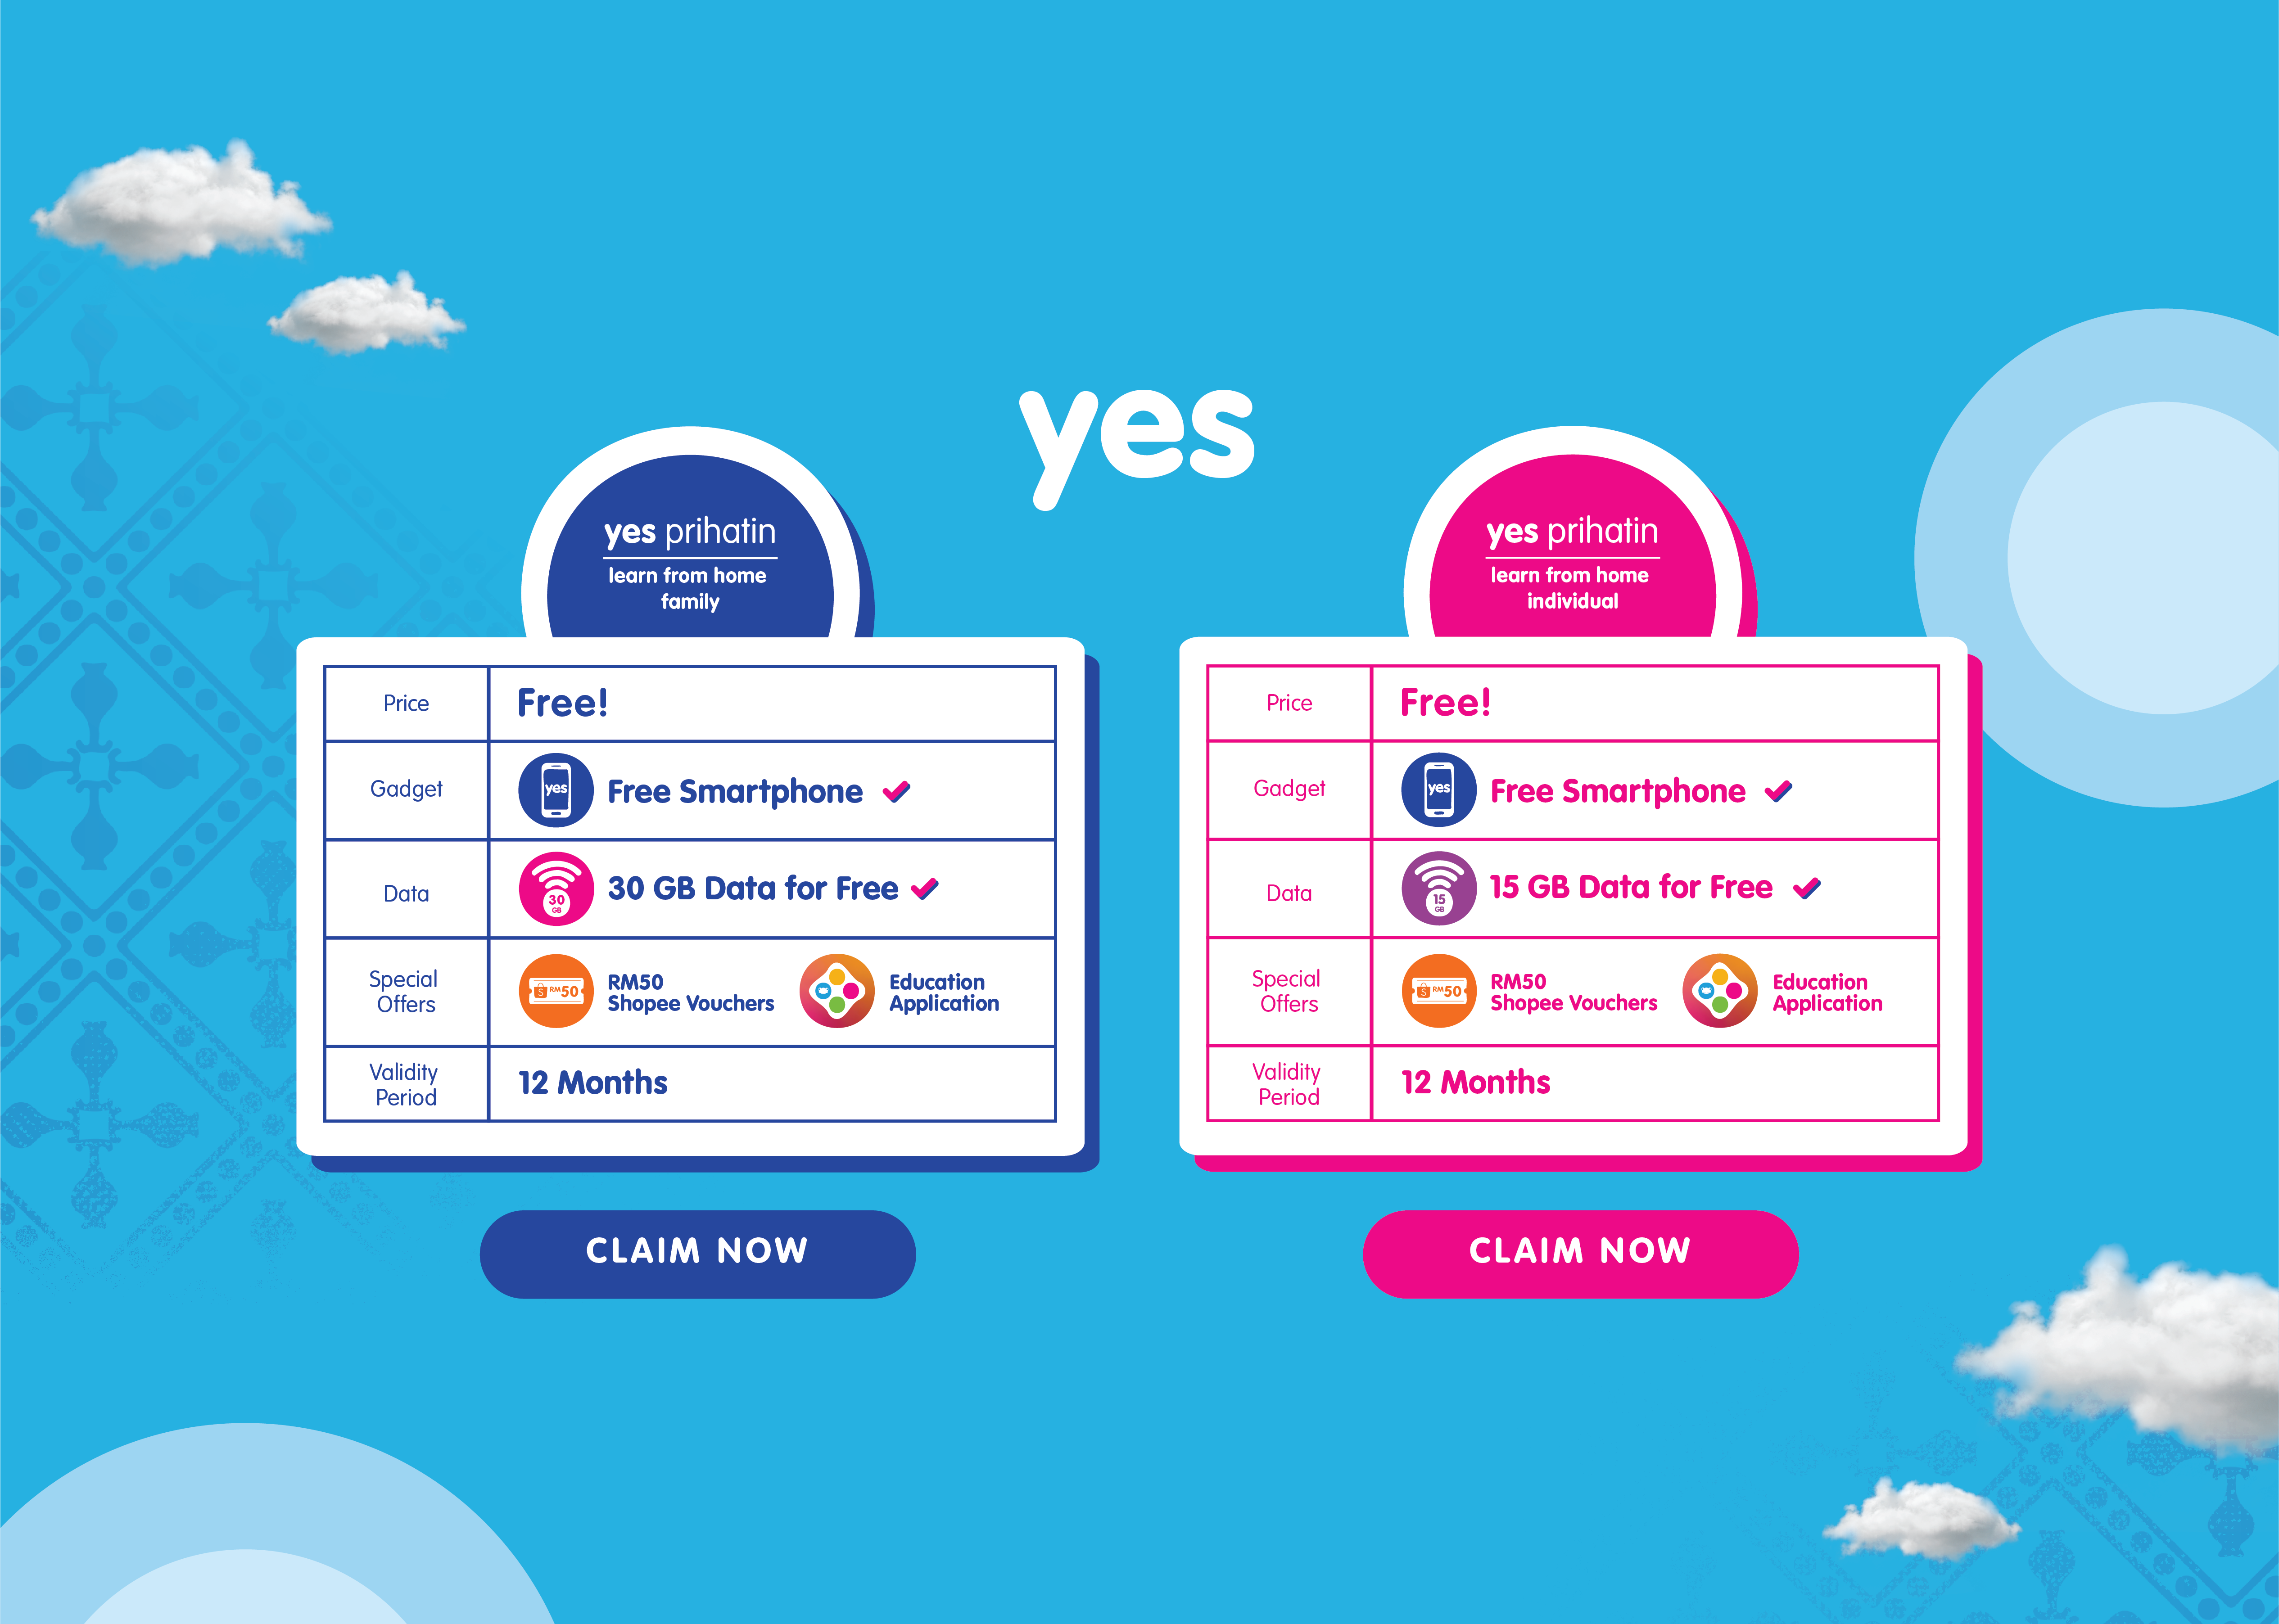 YES’s Prihatin plans offer free devices, data to B40 citizens 